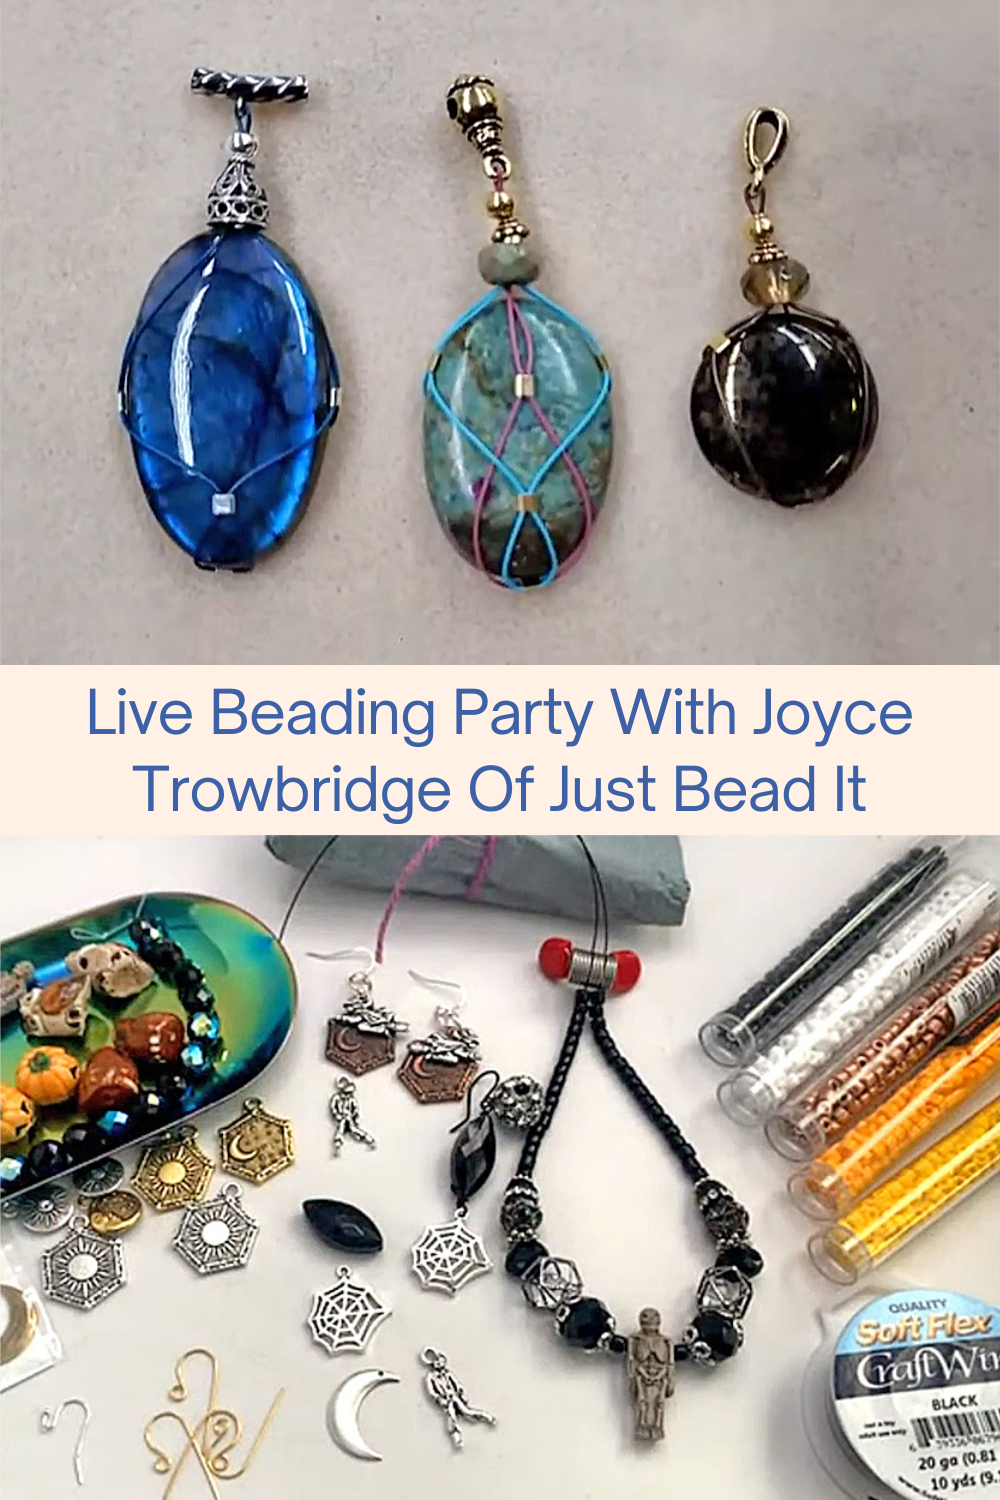 Live Beading Party With Joyce Trowbridge Of Just Bead It Collage